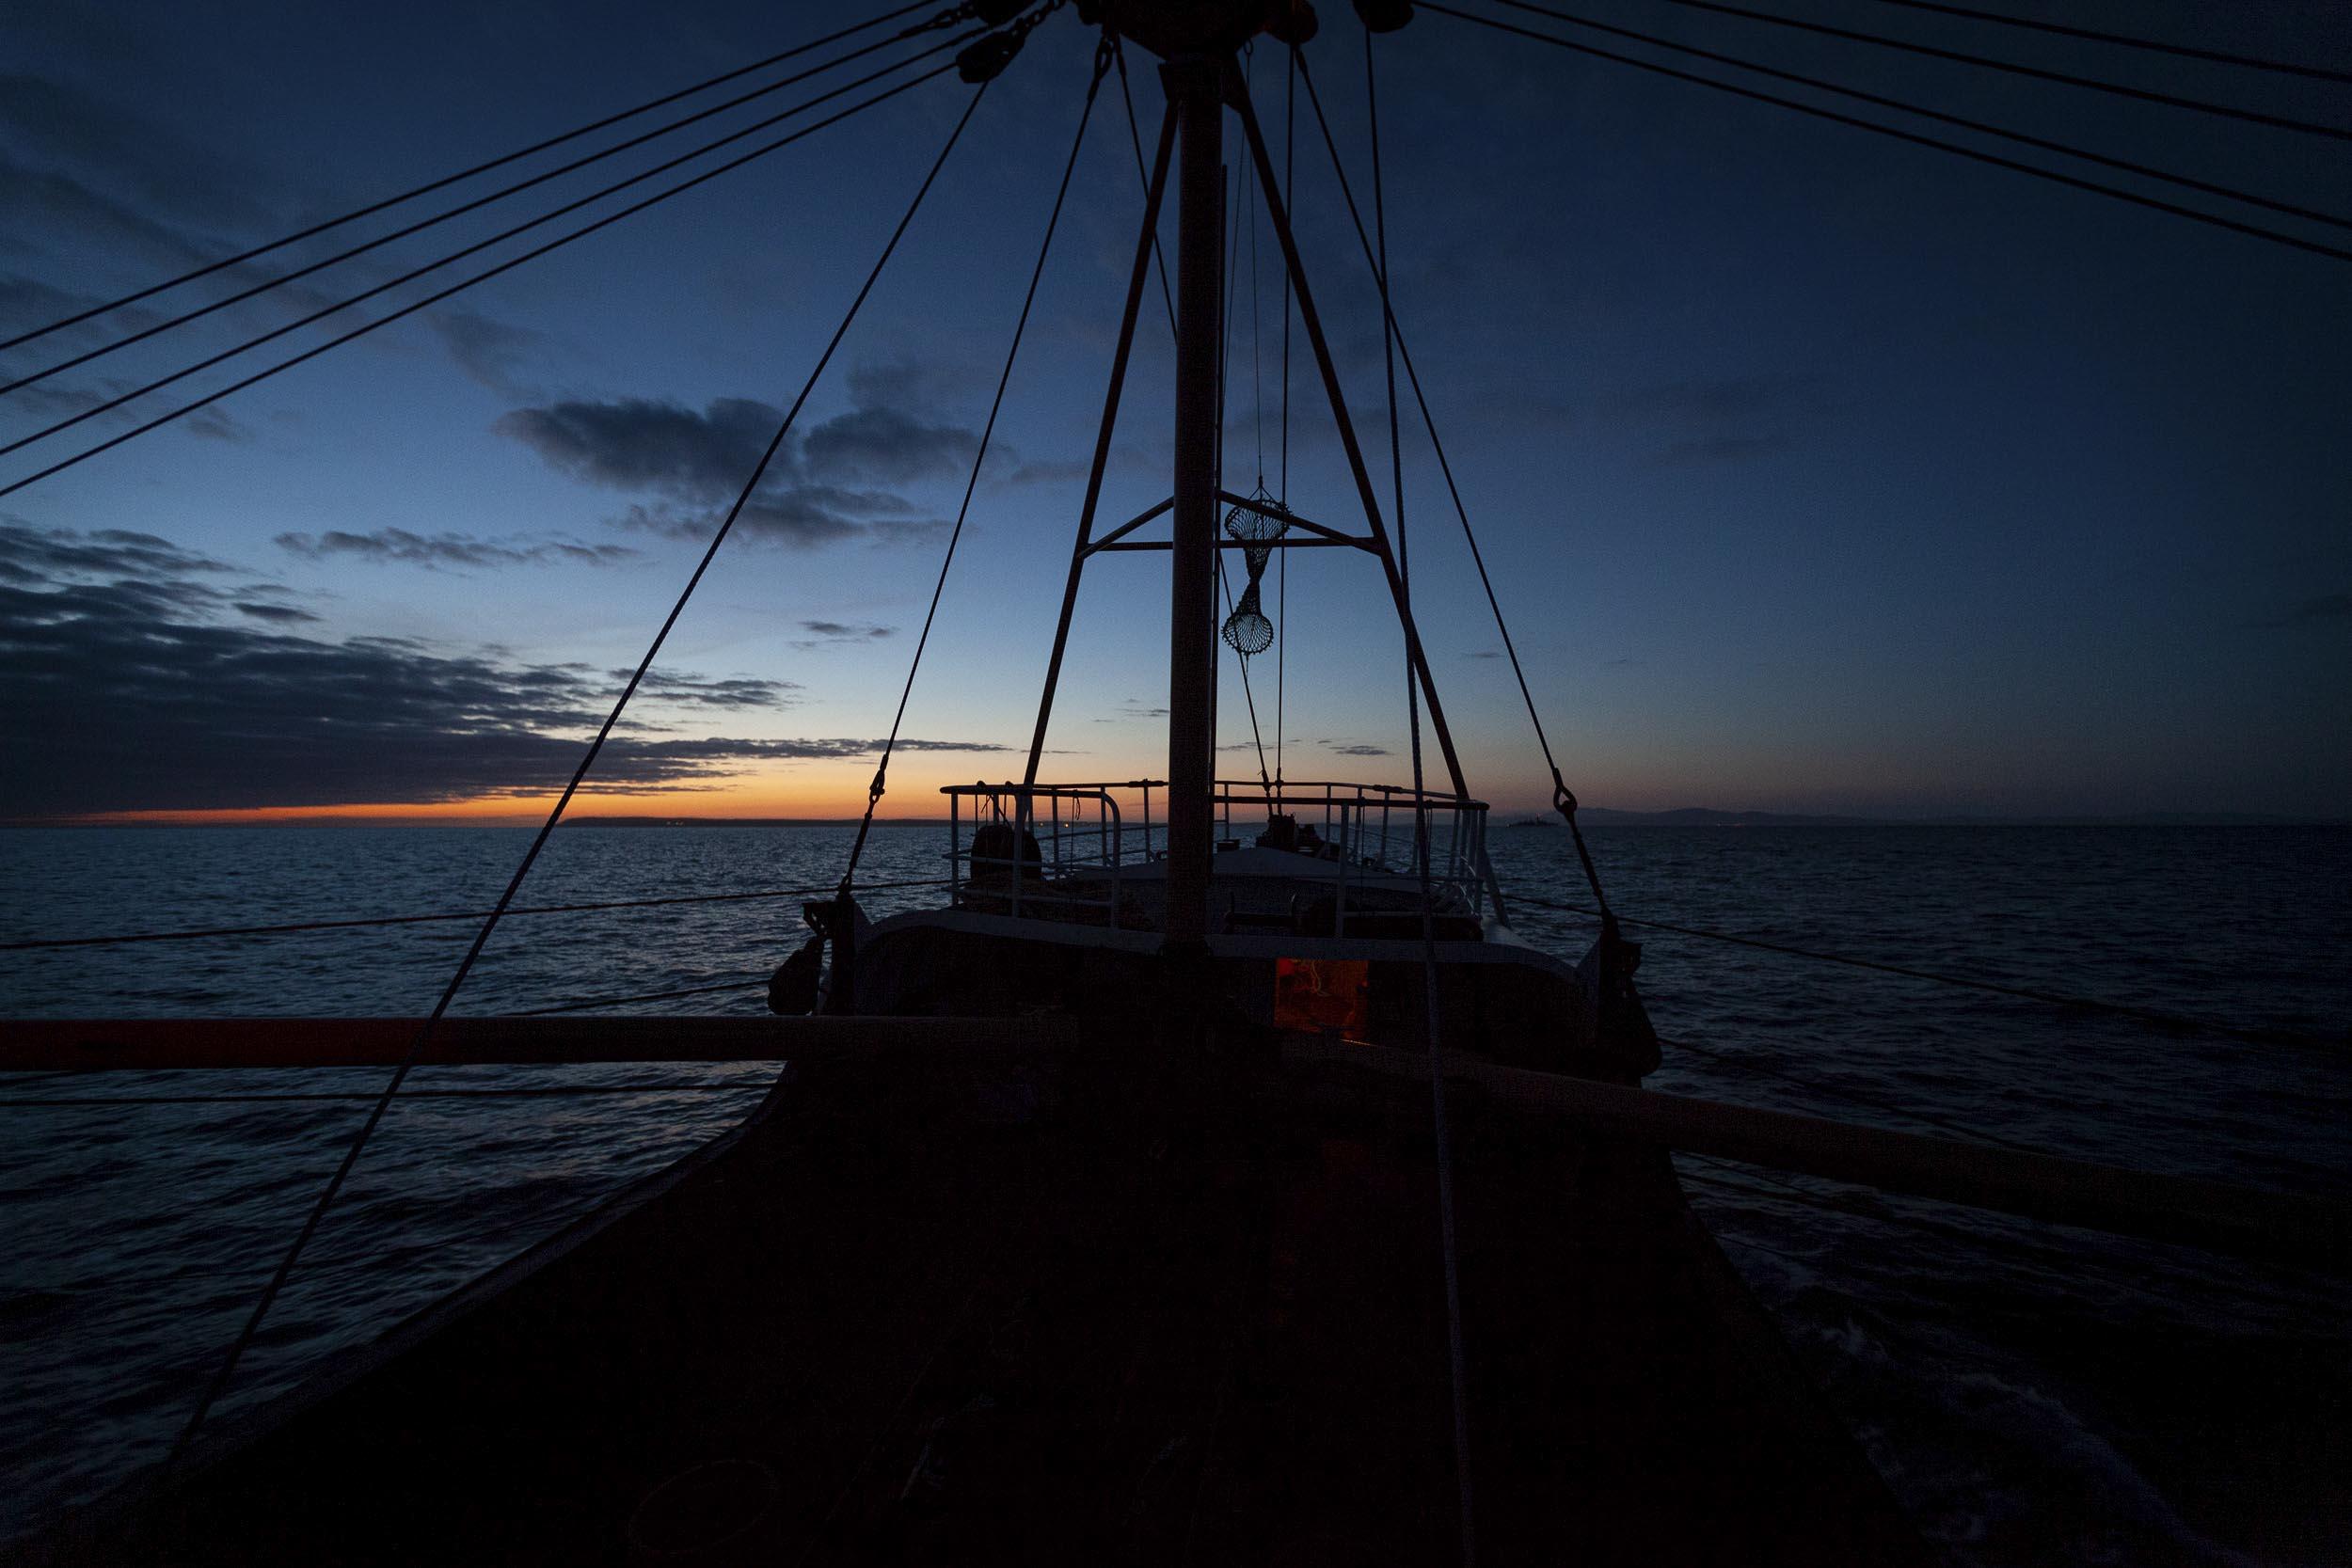 A fishing vessel out at sea as the sun is setting.